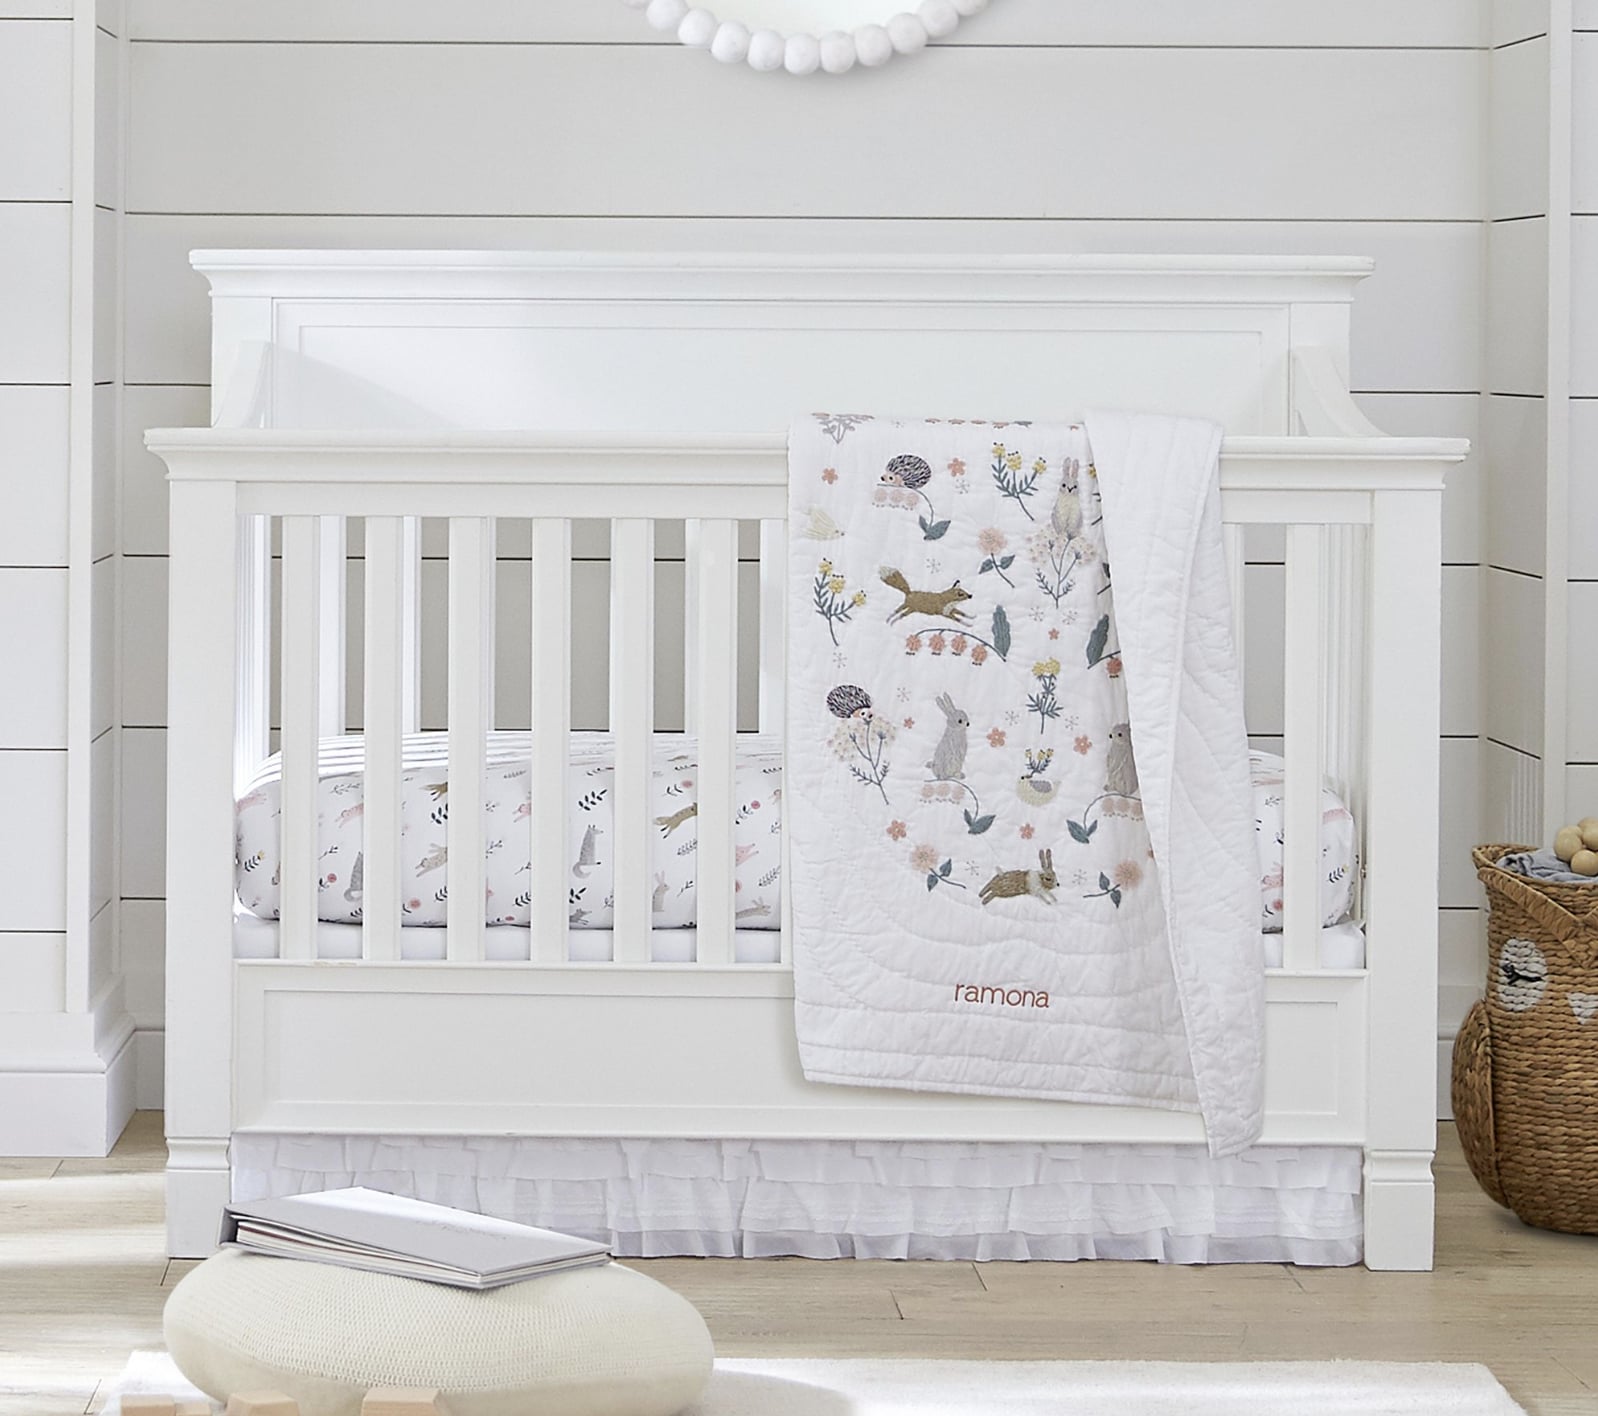 POTTERY BARN KIDS DEBUTS NEW GEAR STYLES AND SHOPPING TOOLS FOR